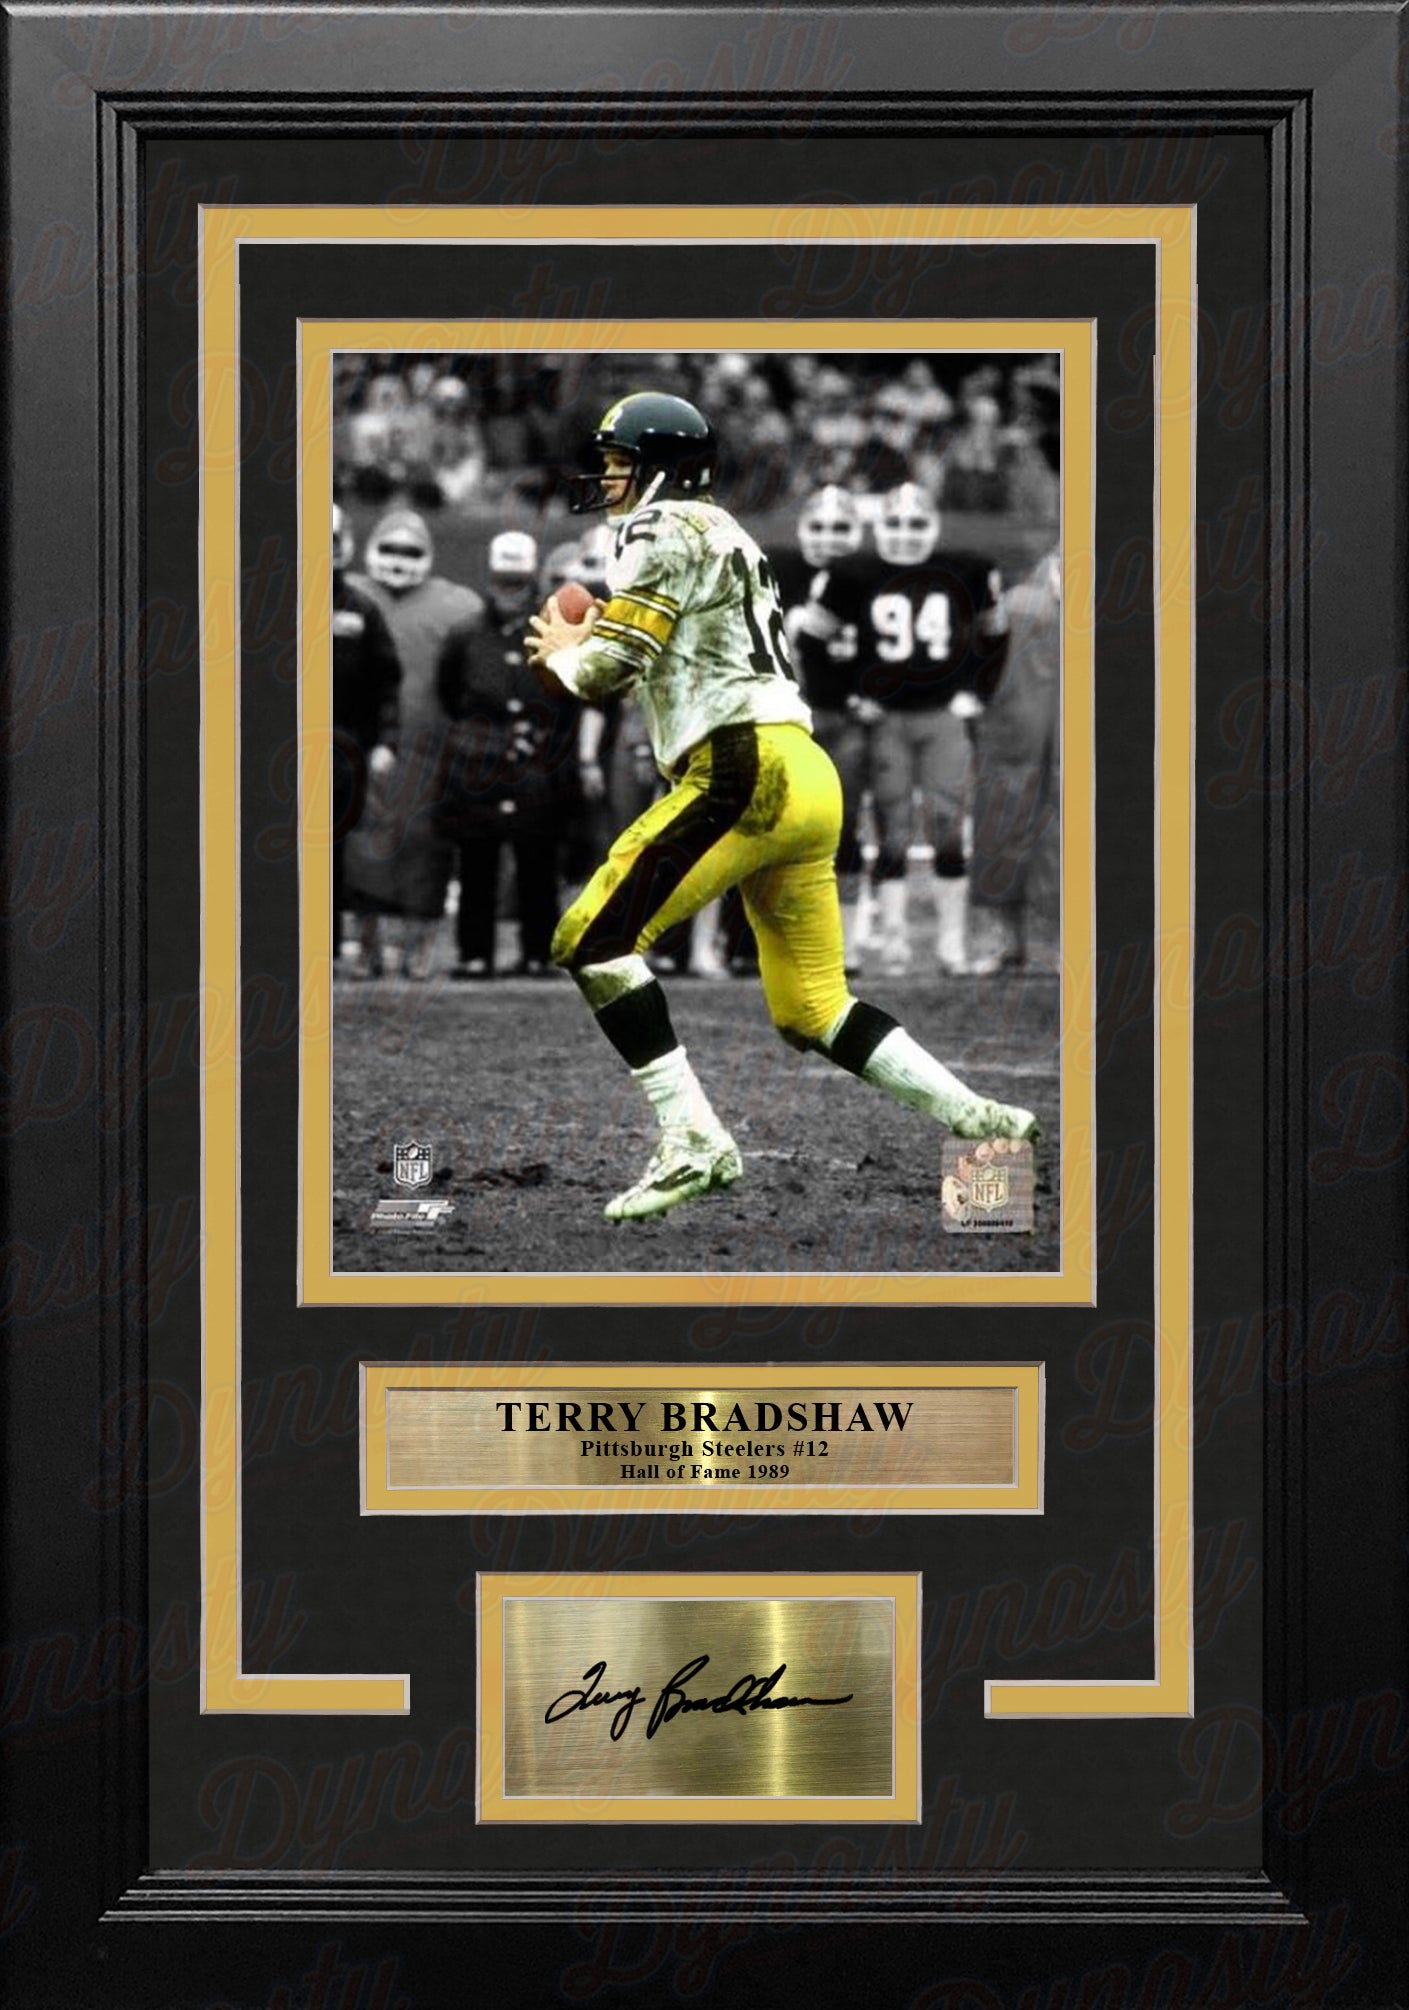 Terry Bradshaw Pittsburgh Steelers 8" x 10" Spotlight Football Photo with Engraved Autograph - Dynasty Sports & Framing 